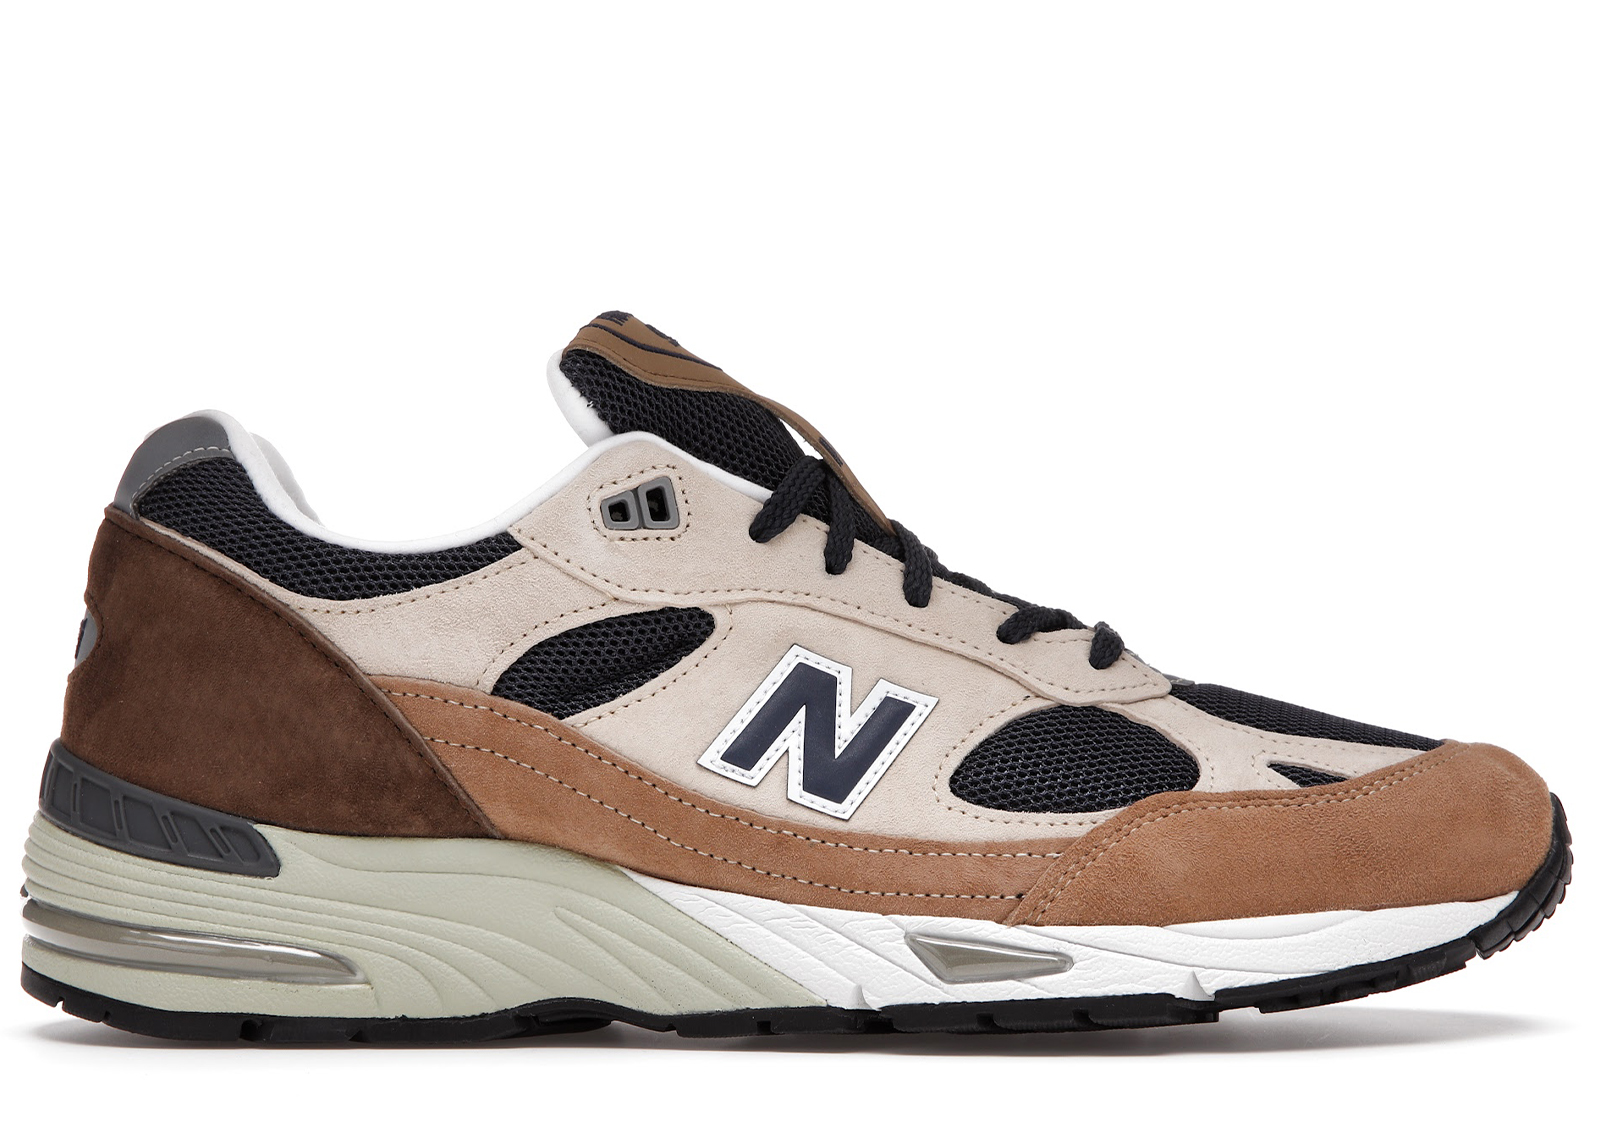 New Balance 991 Made In England Cappuccino